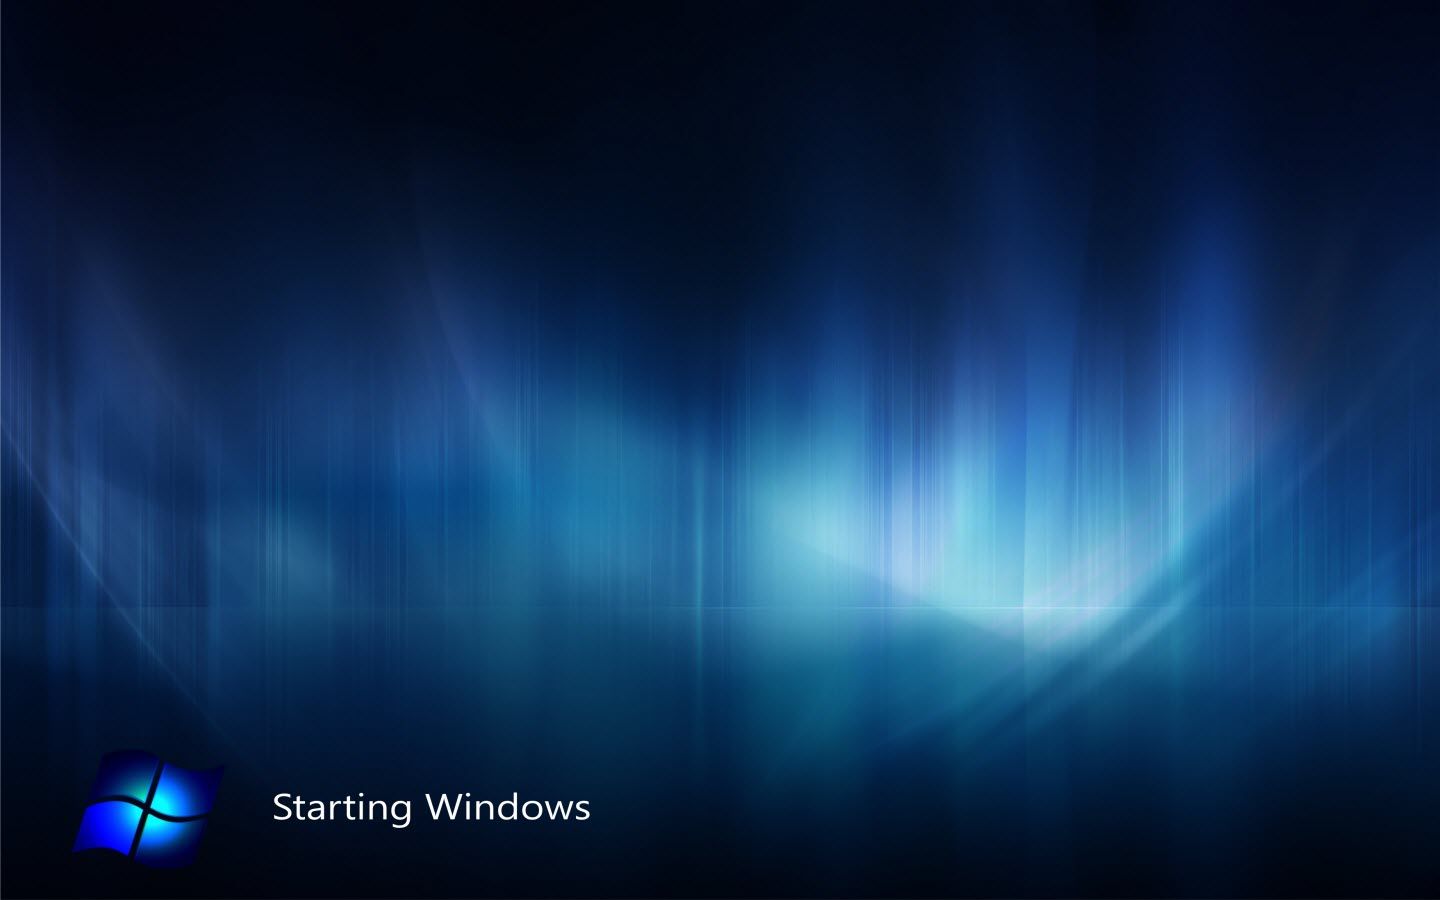 Download FREE Windows 8 Wallpapers